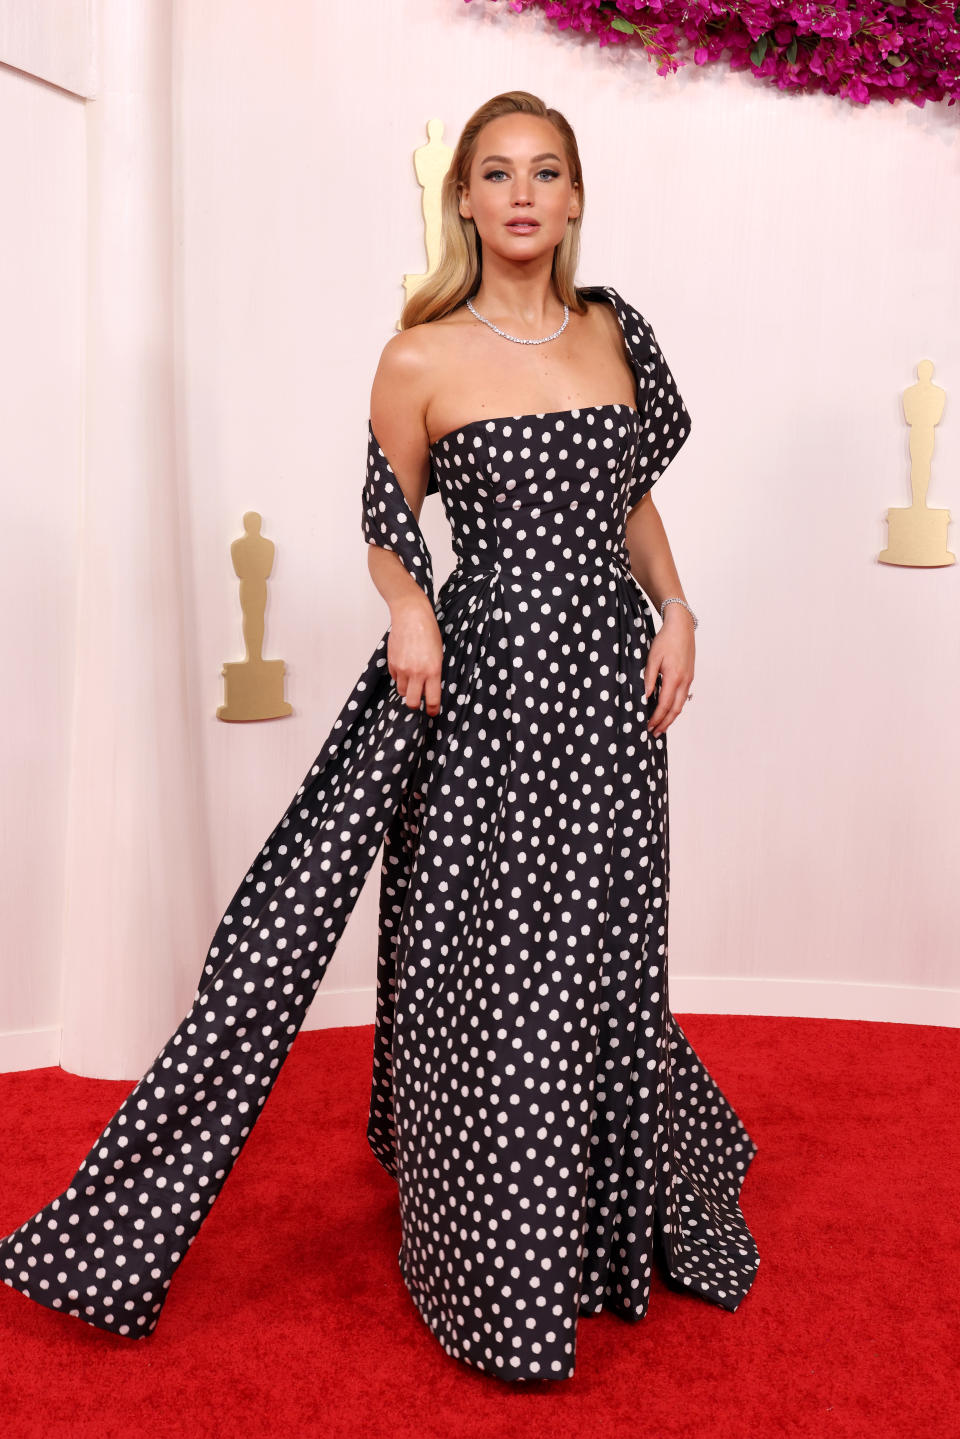 Jennifer Lawrence stunned in a polka-dot number. Photo: Getty